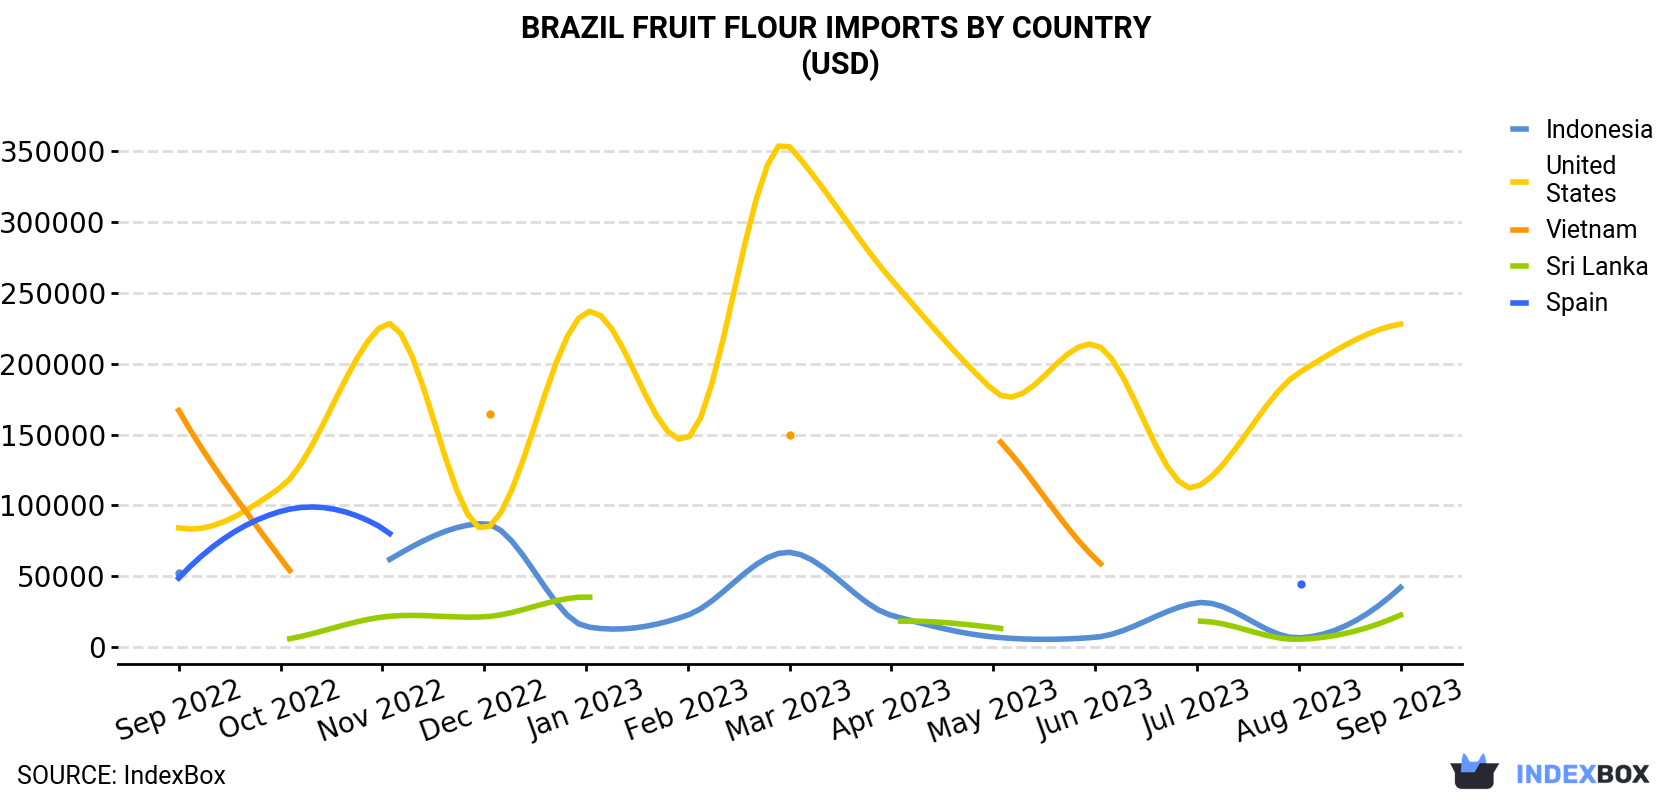 Brazil Fruit Flour Imports By Country (USD)